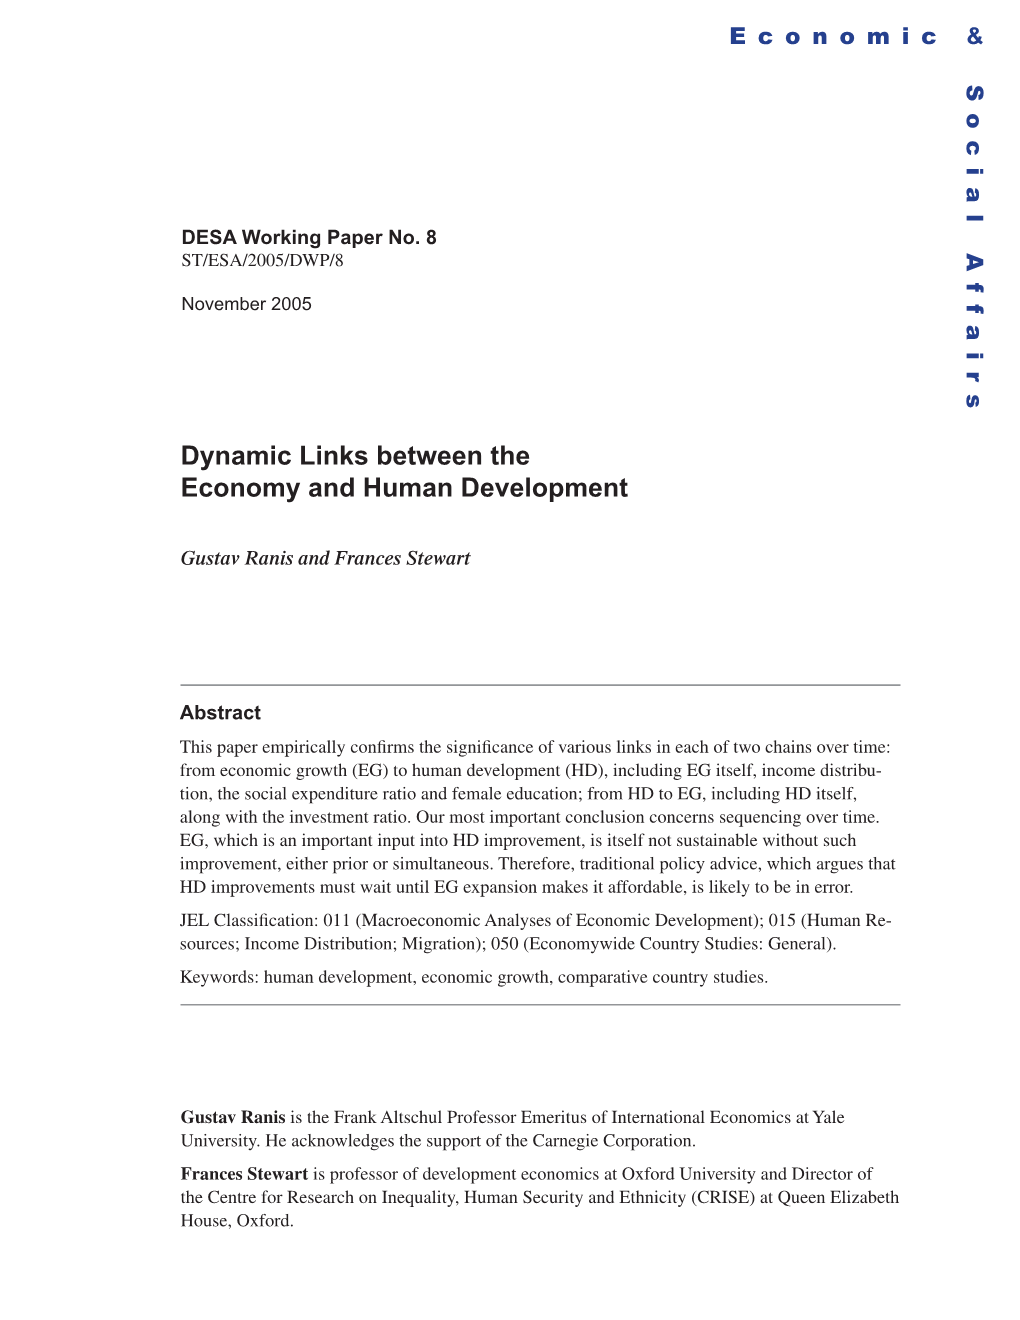 Dynamic Links Between the Economy and Human Development